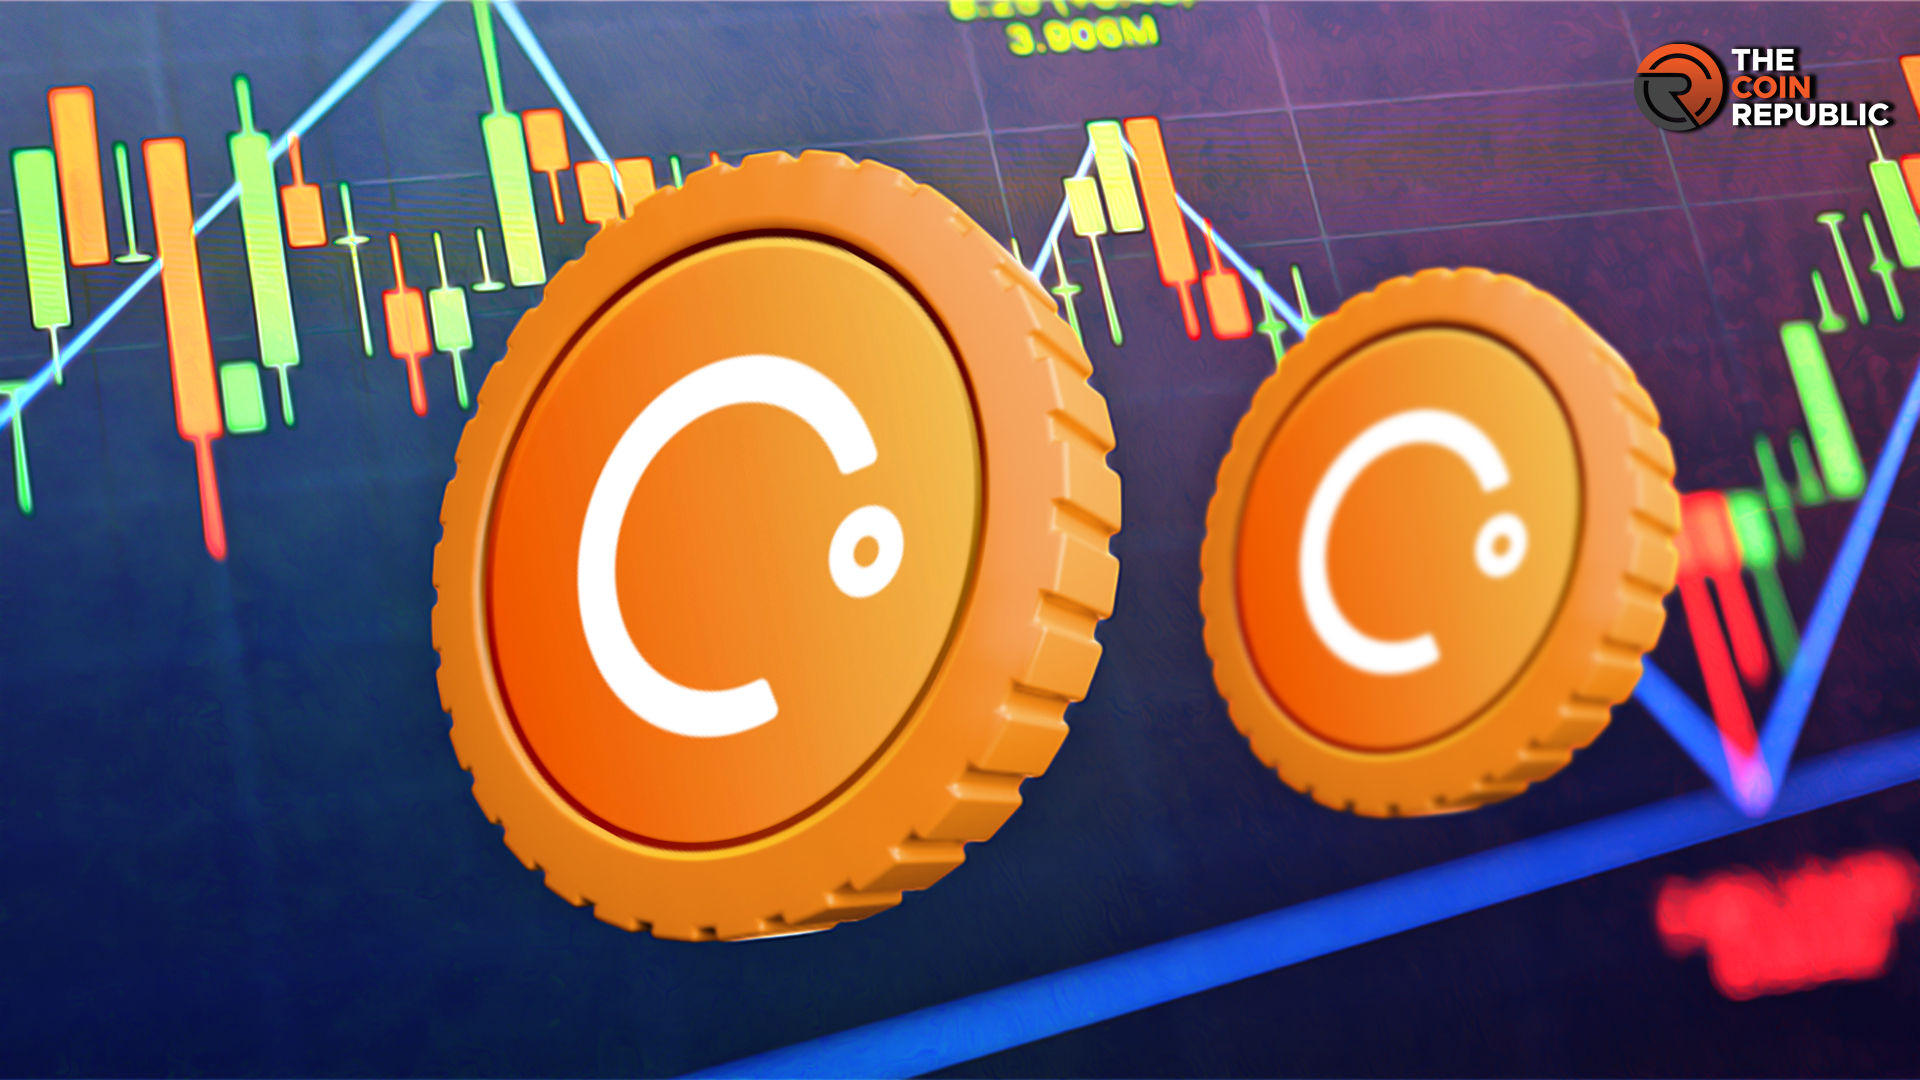 Celsius Price Fails to Gain Traction: Is a Severe Drop Inevitable